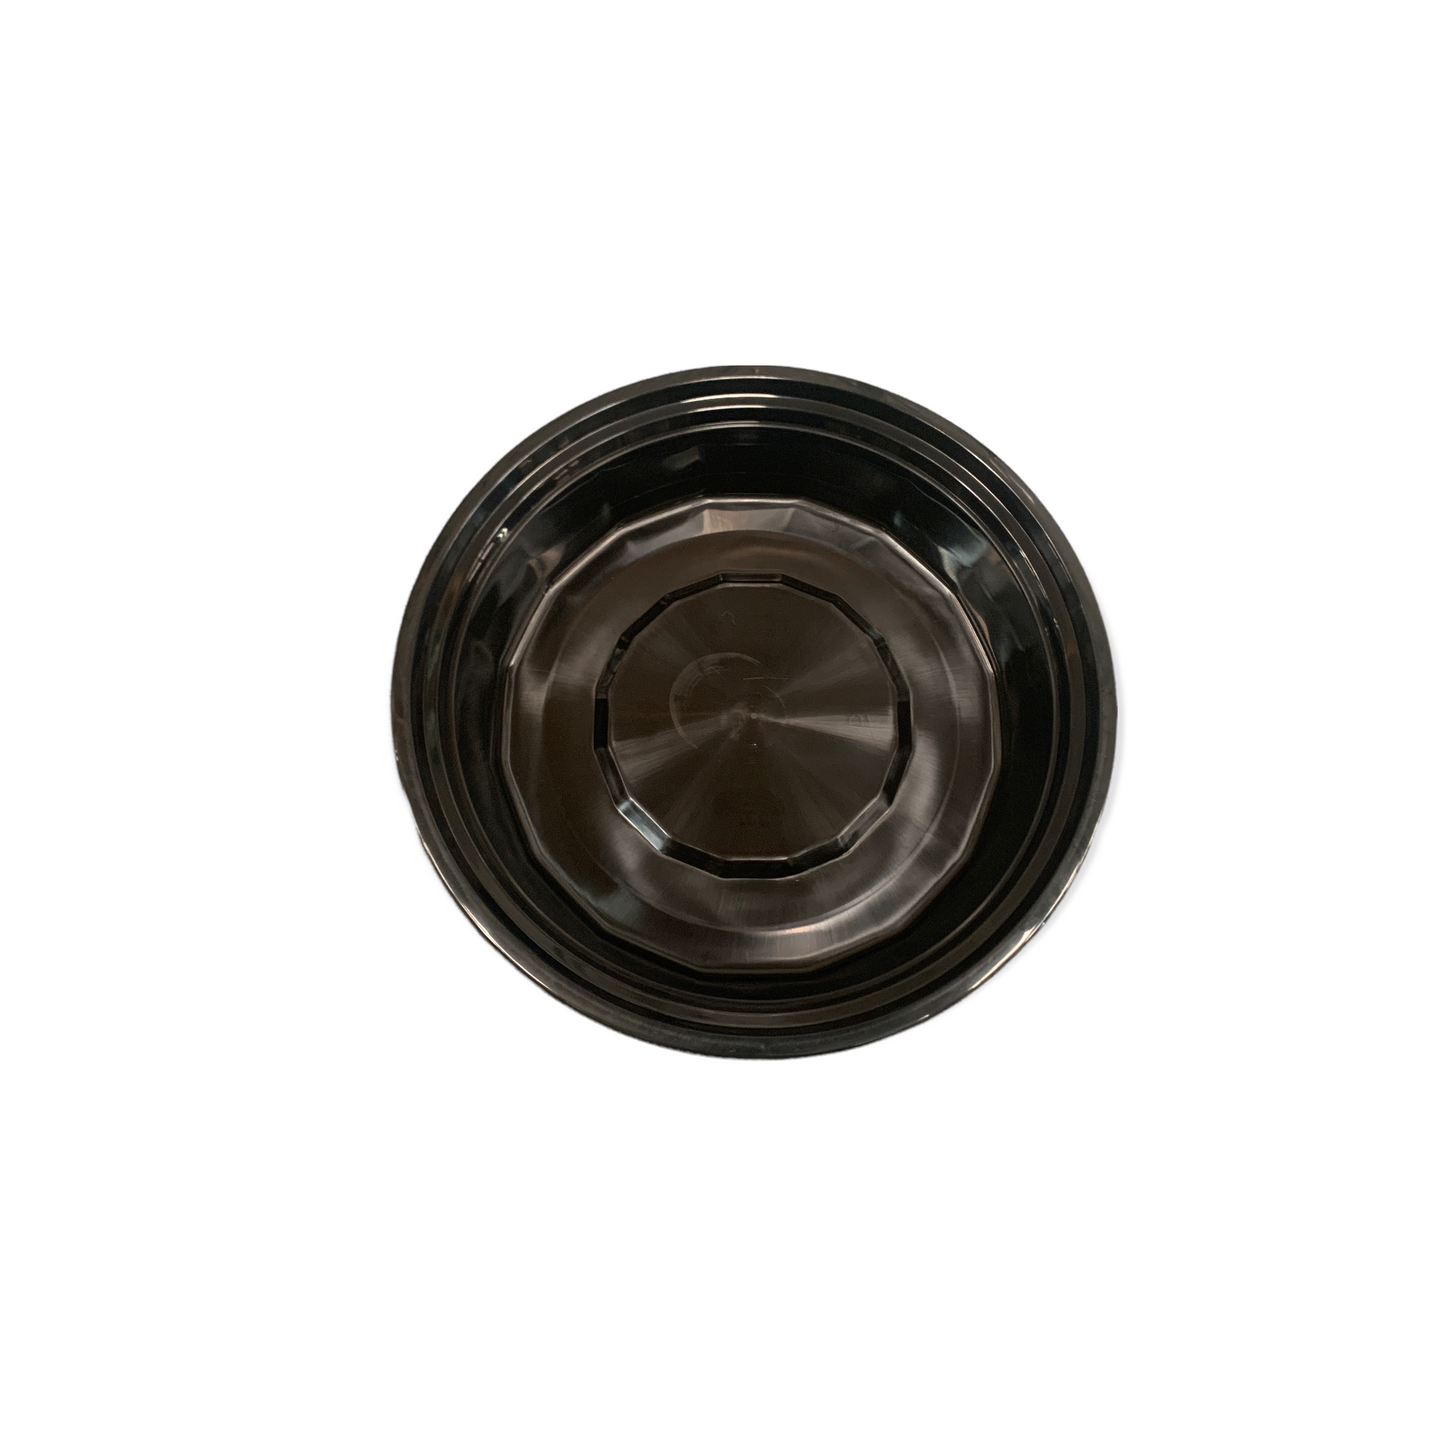 Round Black Containers and Lid-150 Sets